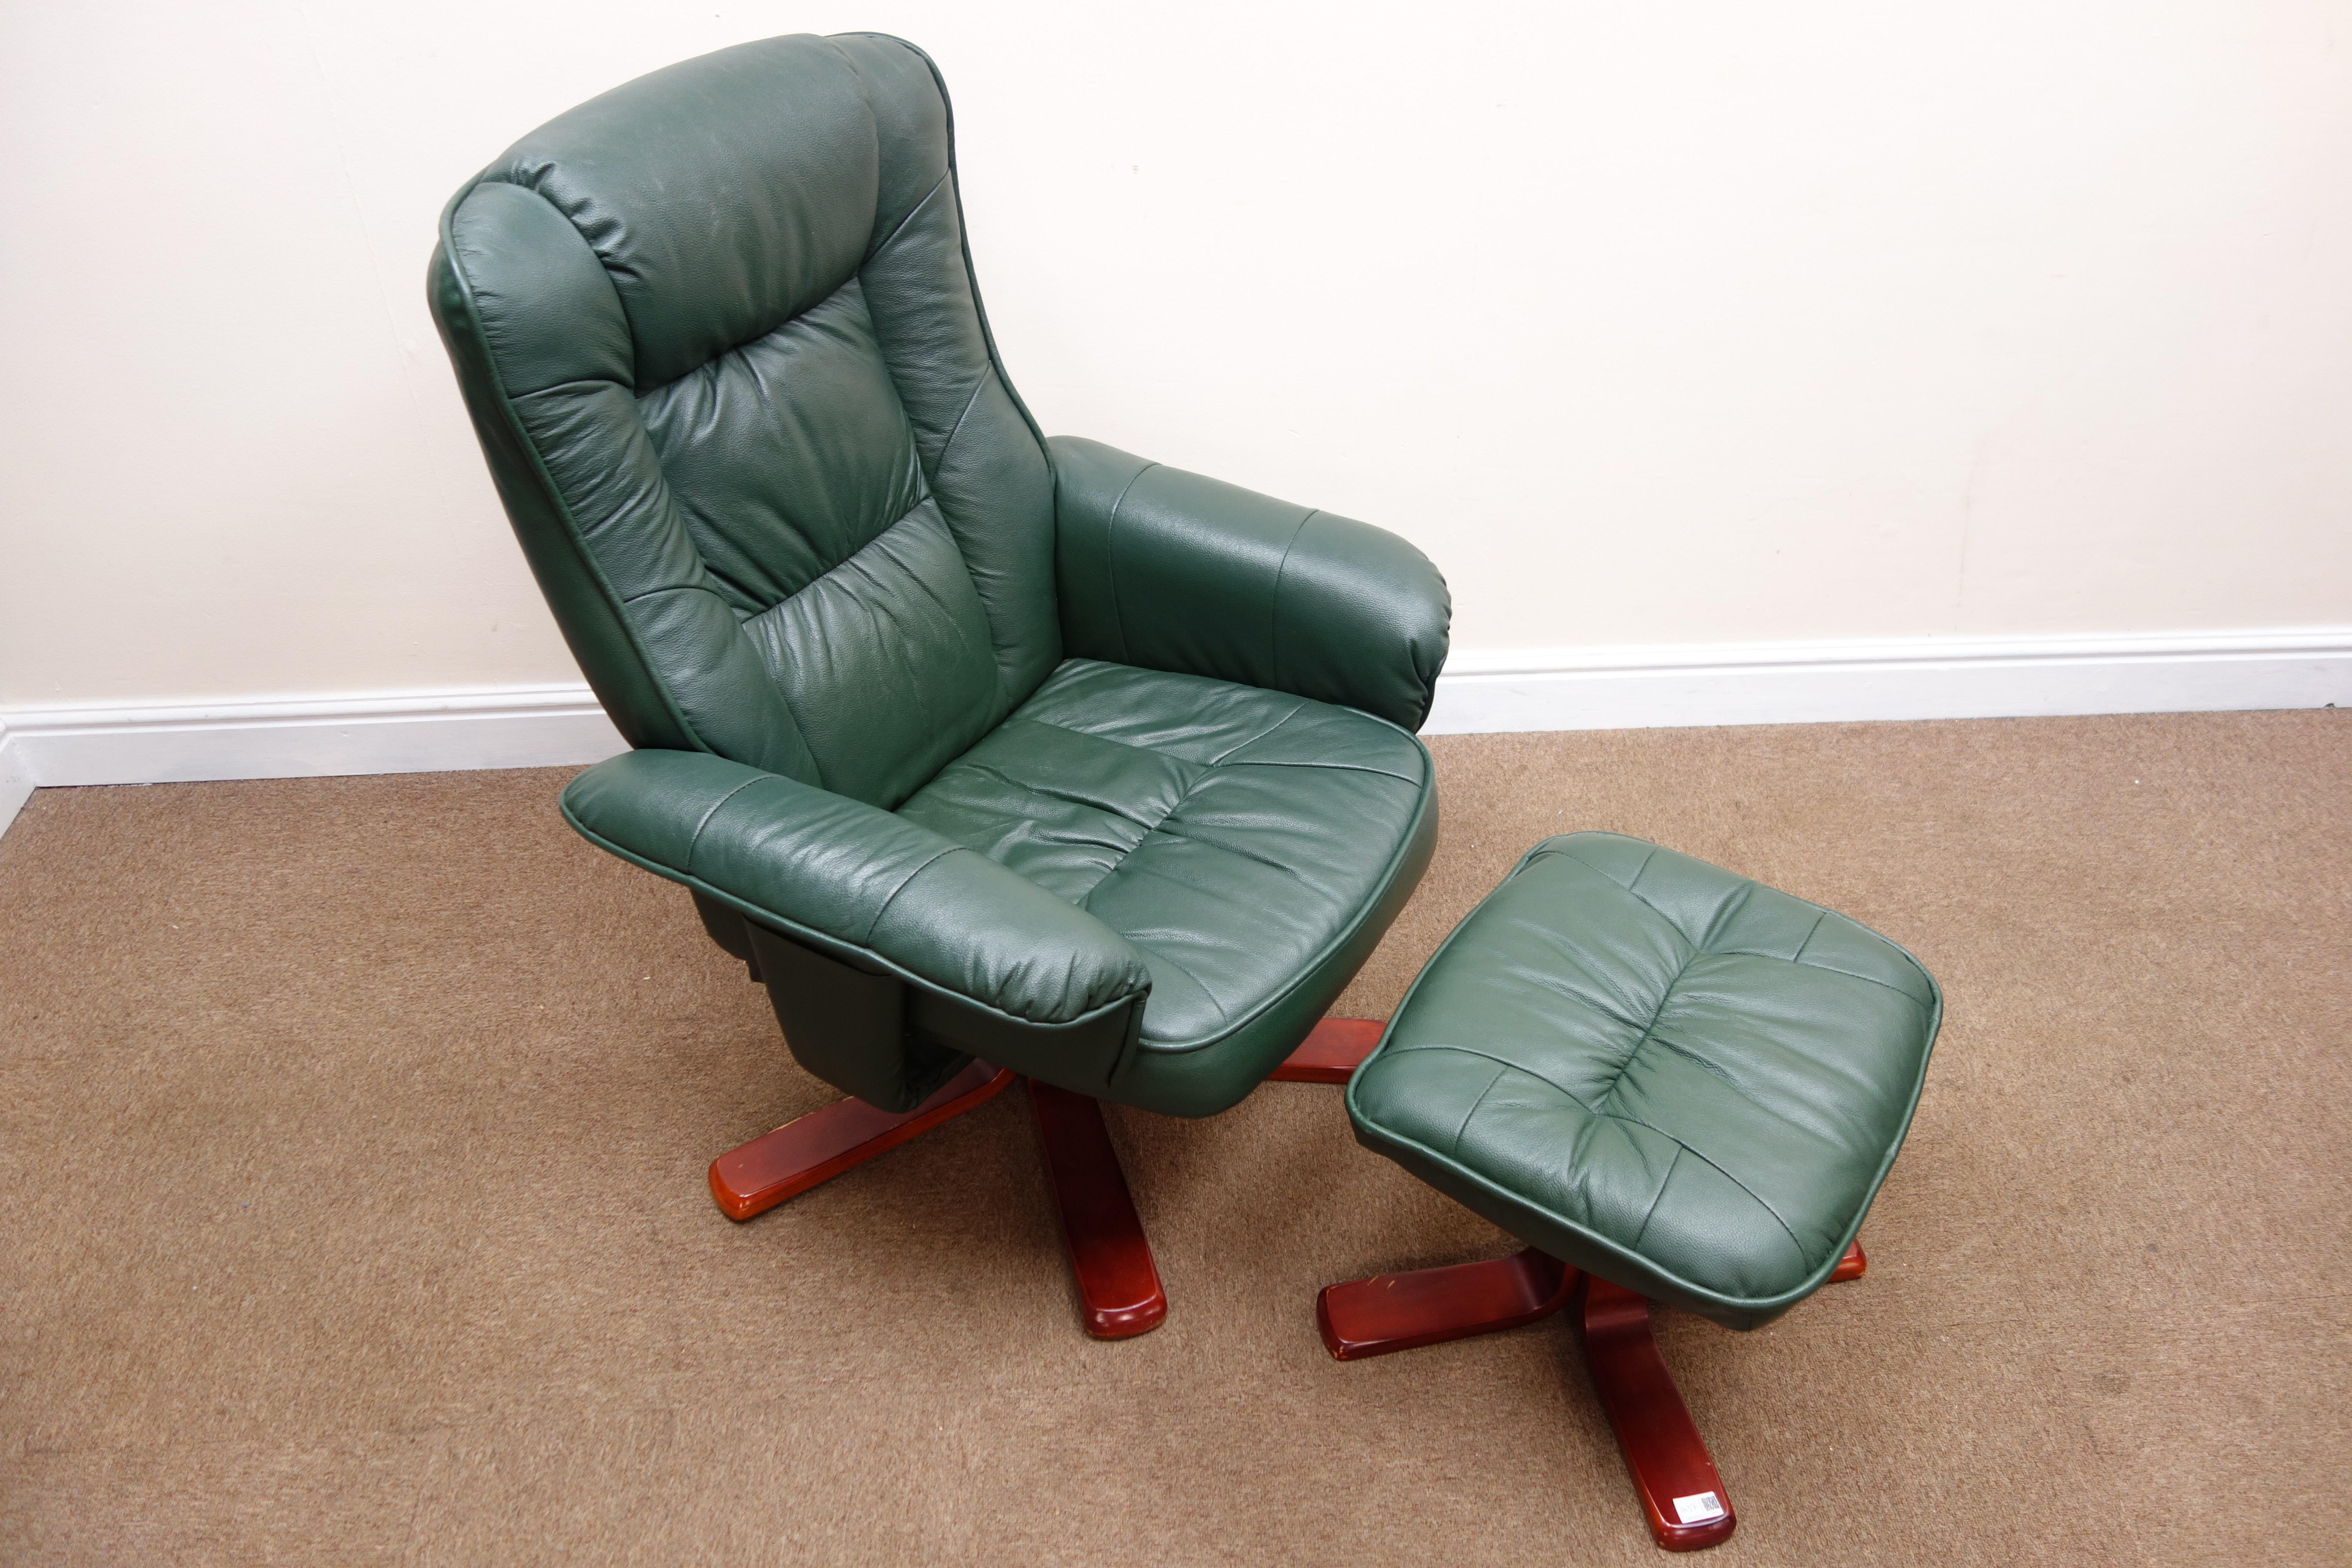 Recliner armchair upholstered in green faux leather (W77cm) with stool (2) Condition - Image 2 of 2